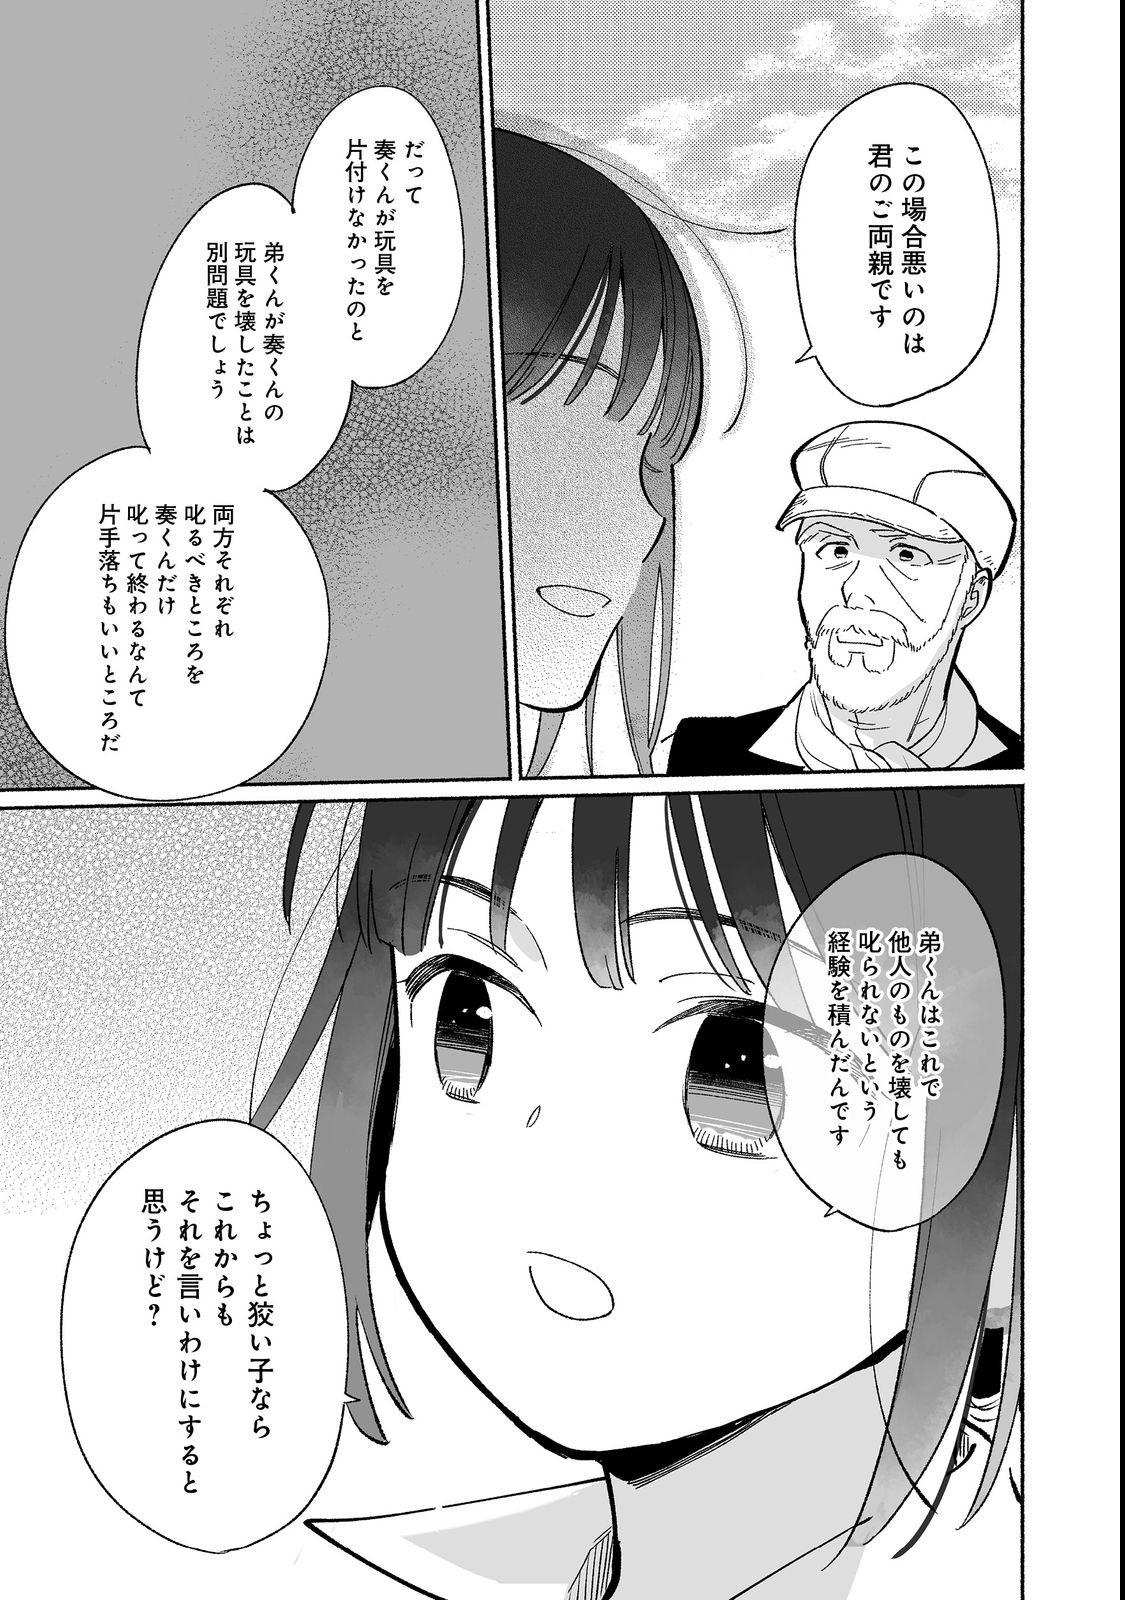 I’m the White Pig Nobleman 第18.1話 - Page 11